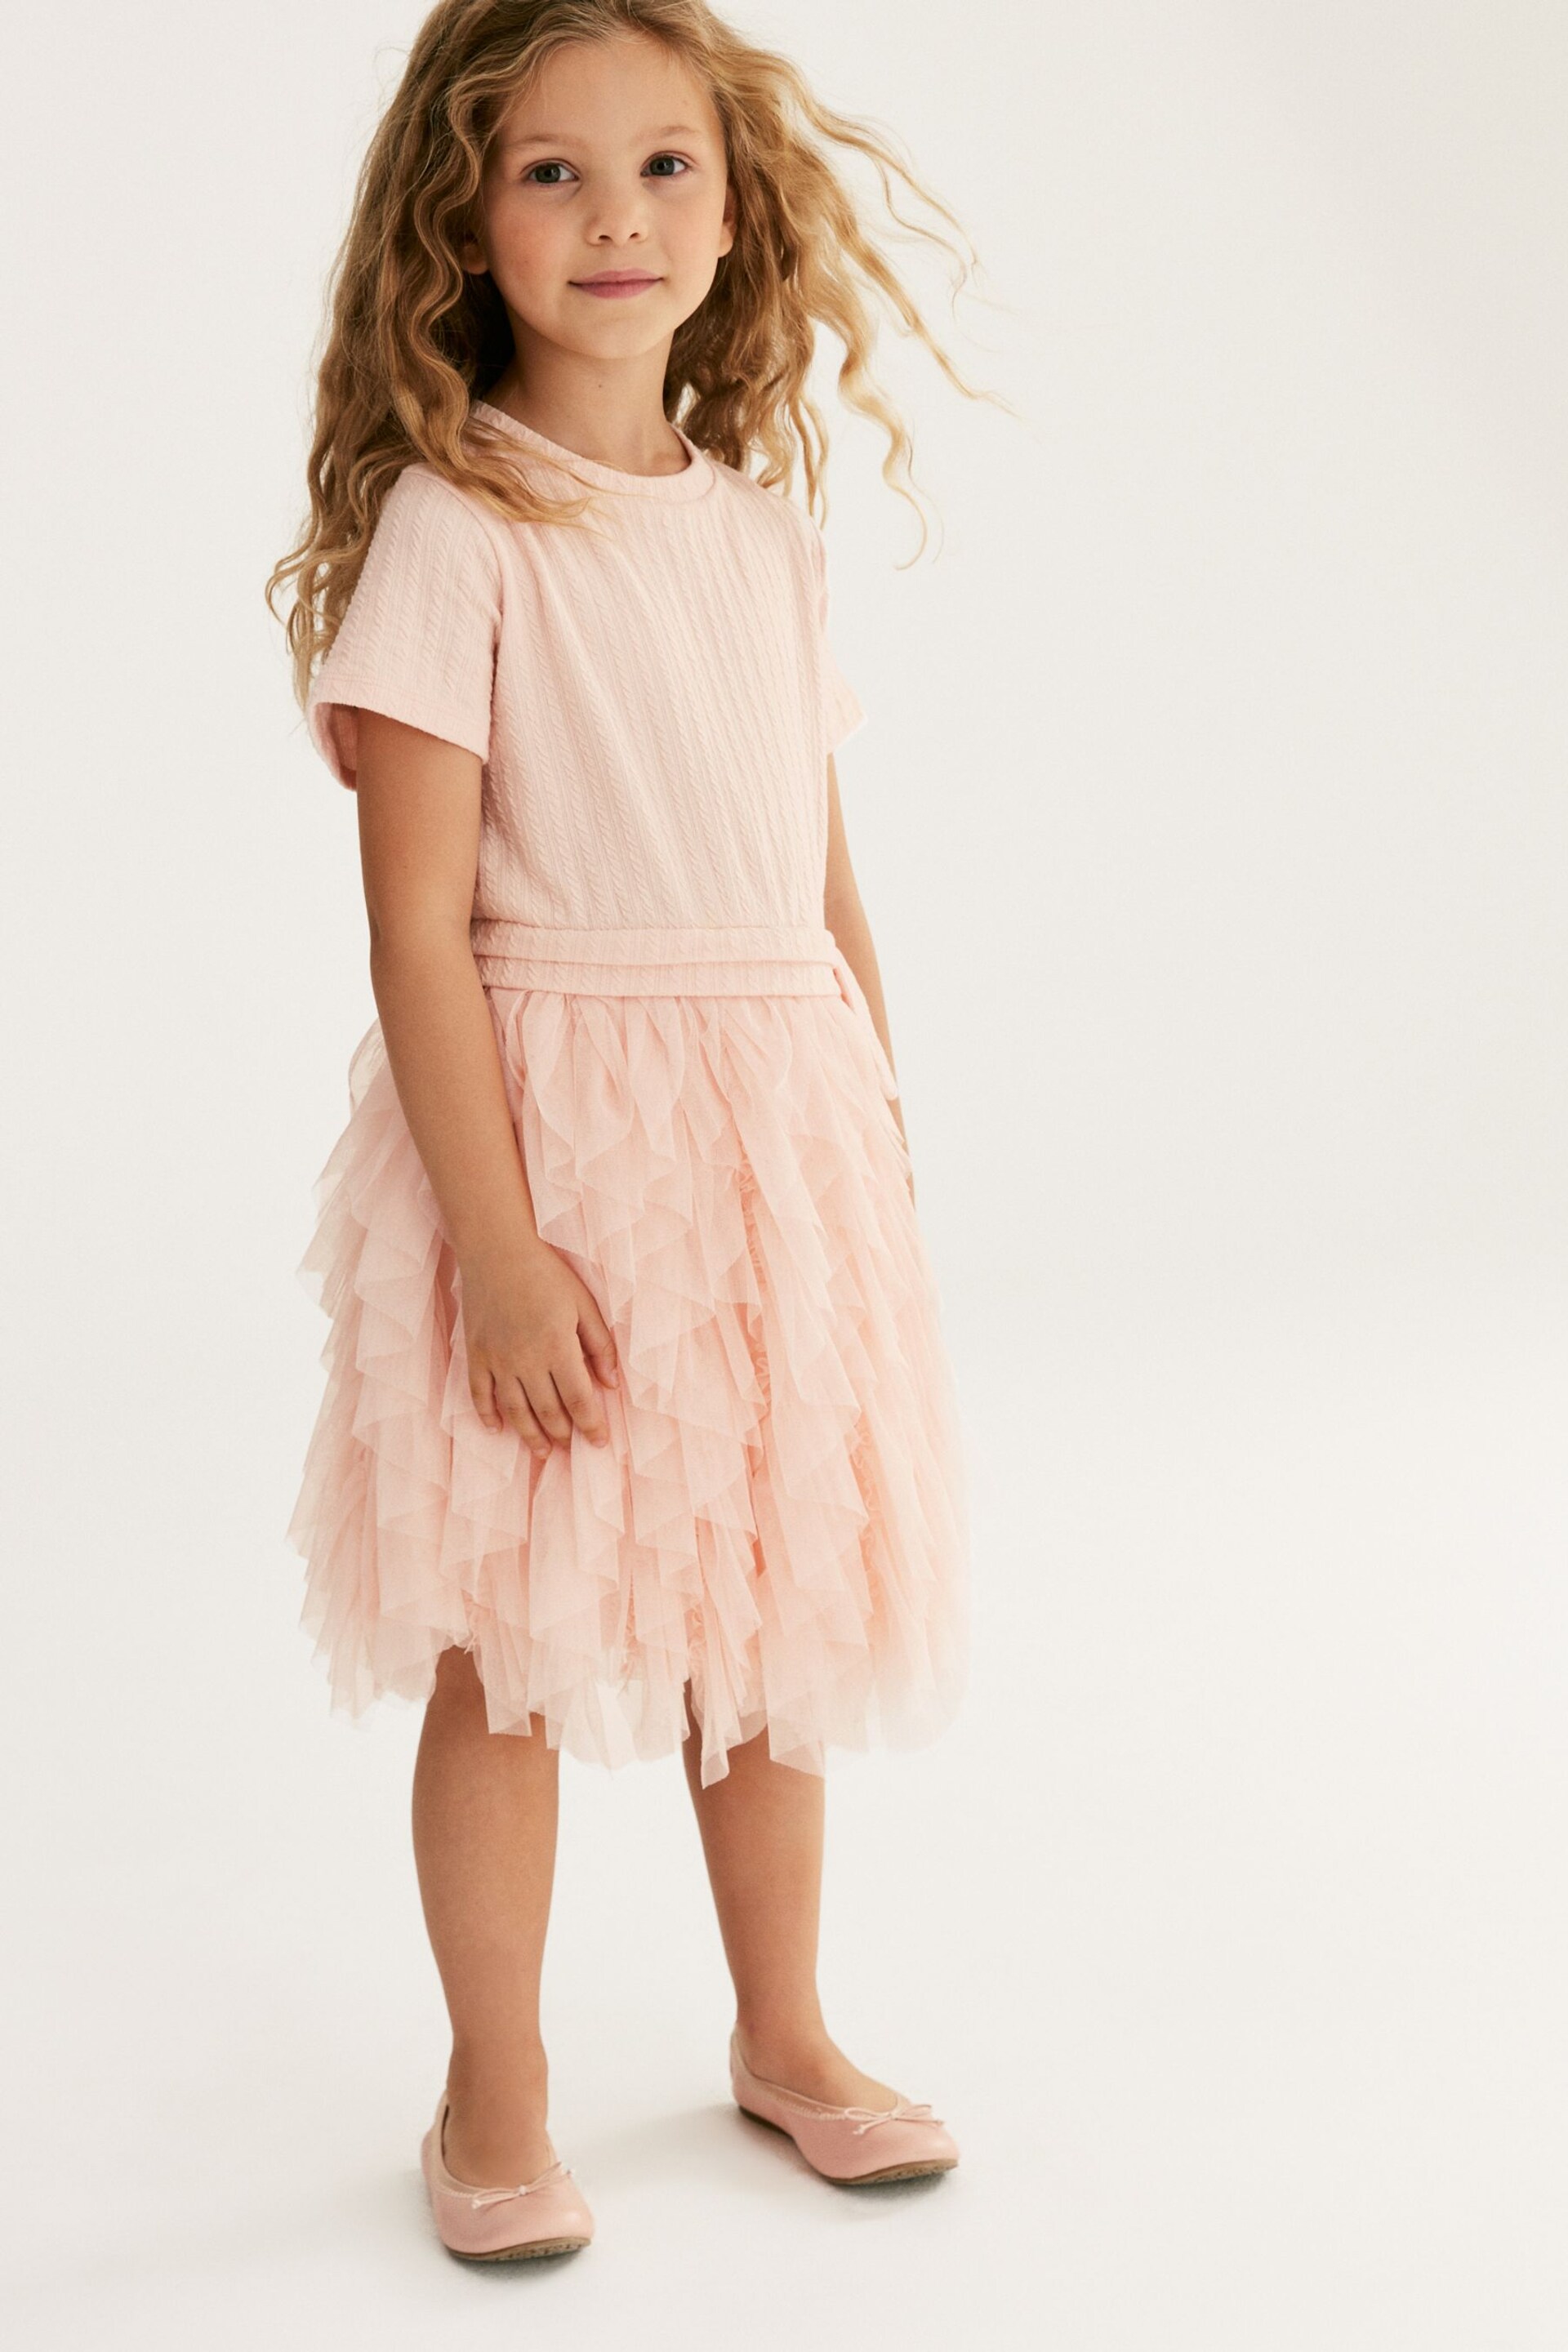 Pink Textured Mesh Frill Dress (3-12yrs) - Image 4 of 7